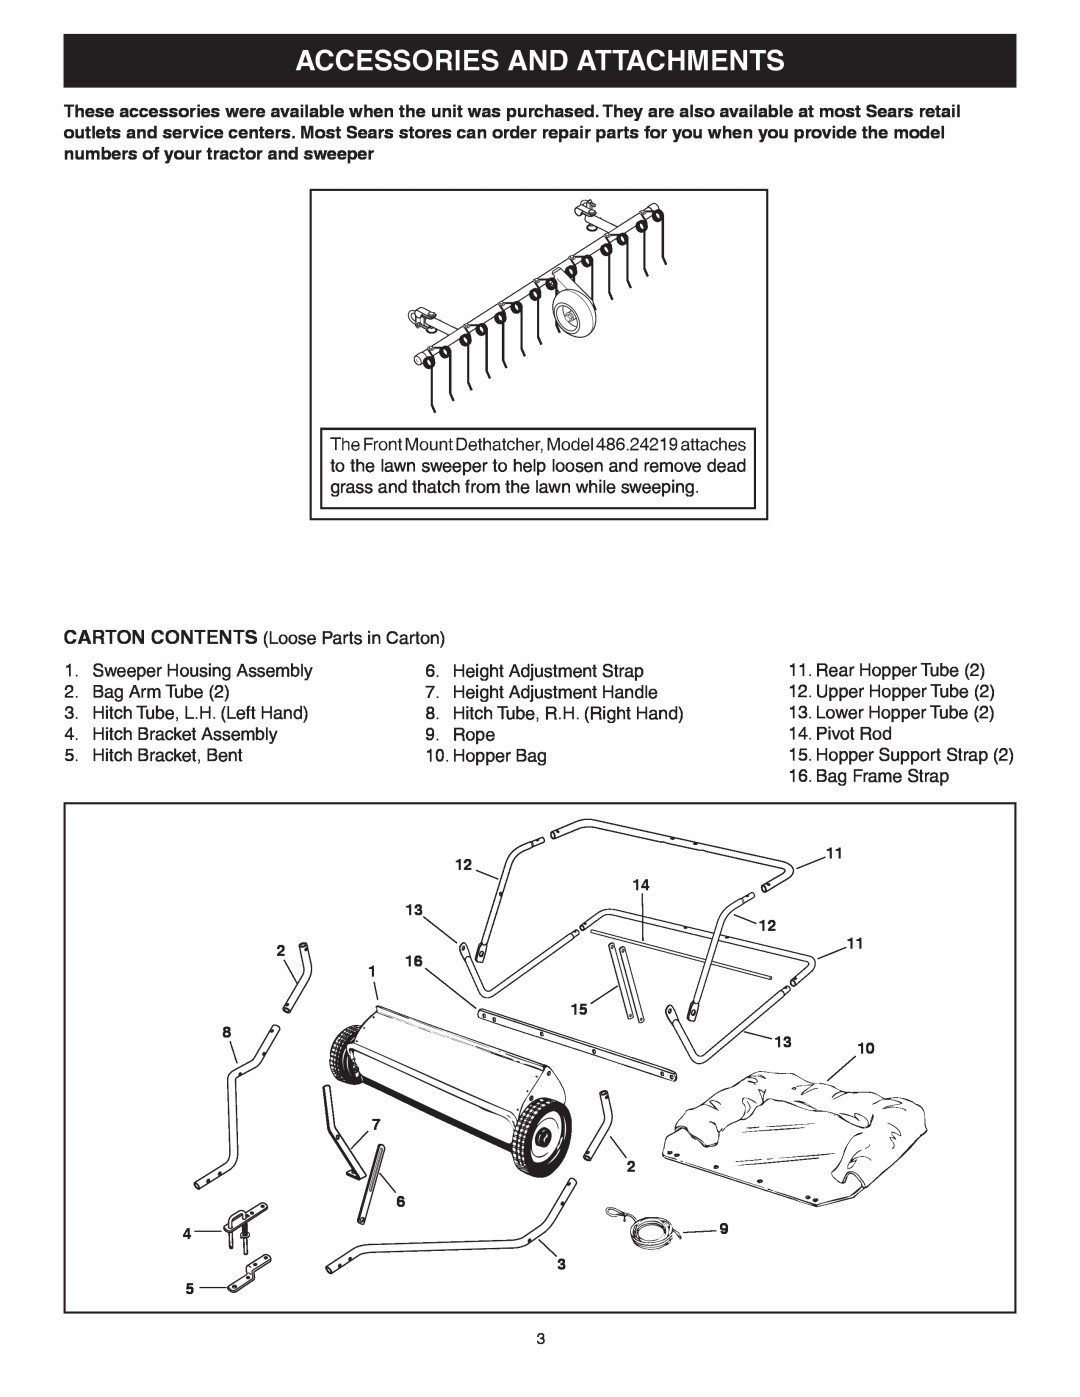 Craftsman 486.24222 owner manual Accessories And Attachments 